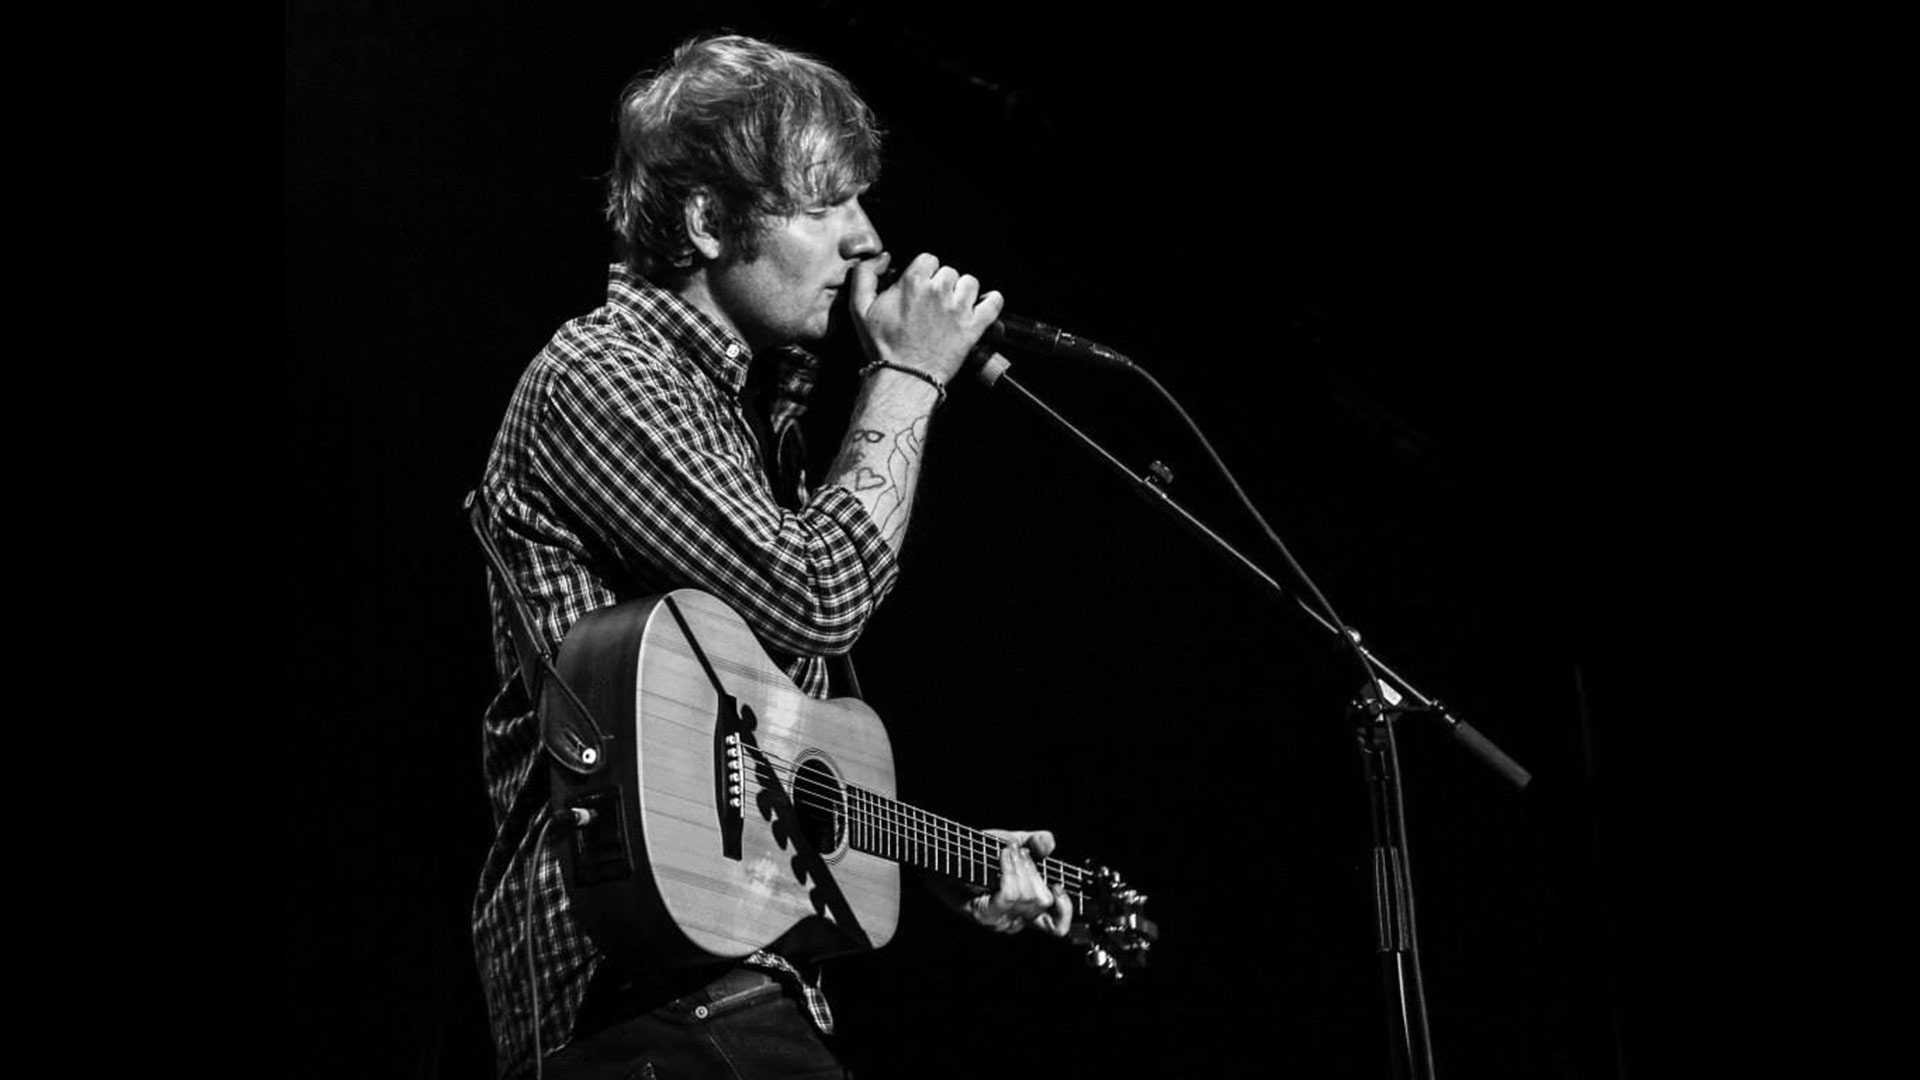 1920x1080 Now, Ed Sheeran is going to perform in Mumbai too | GQ India .